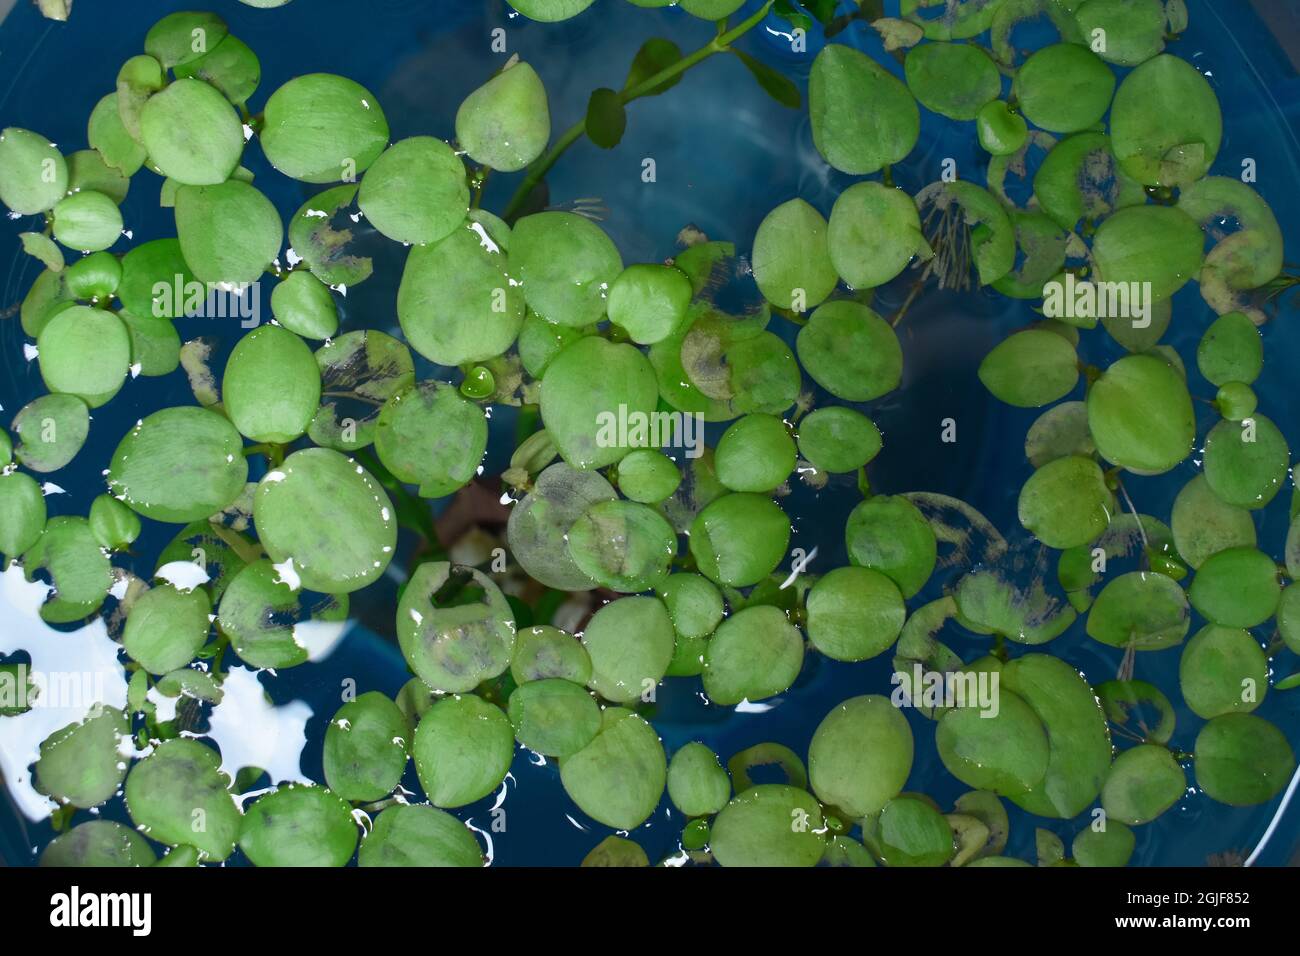 Home aquarium floating plants called Amazon frogbit or Limnobium Laevigatum bitten by freshwater fishes. Leaves are torn. Top view. Stock Photo